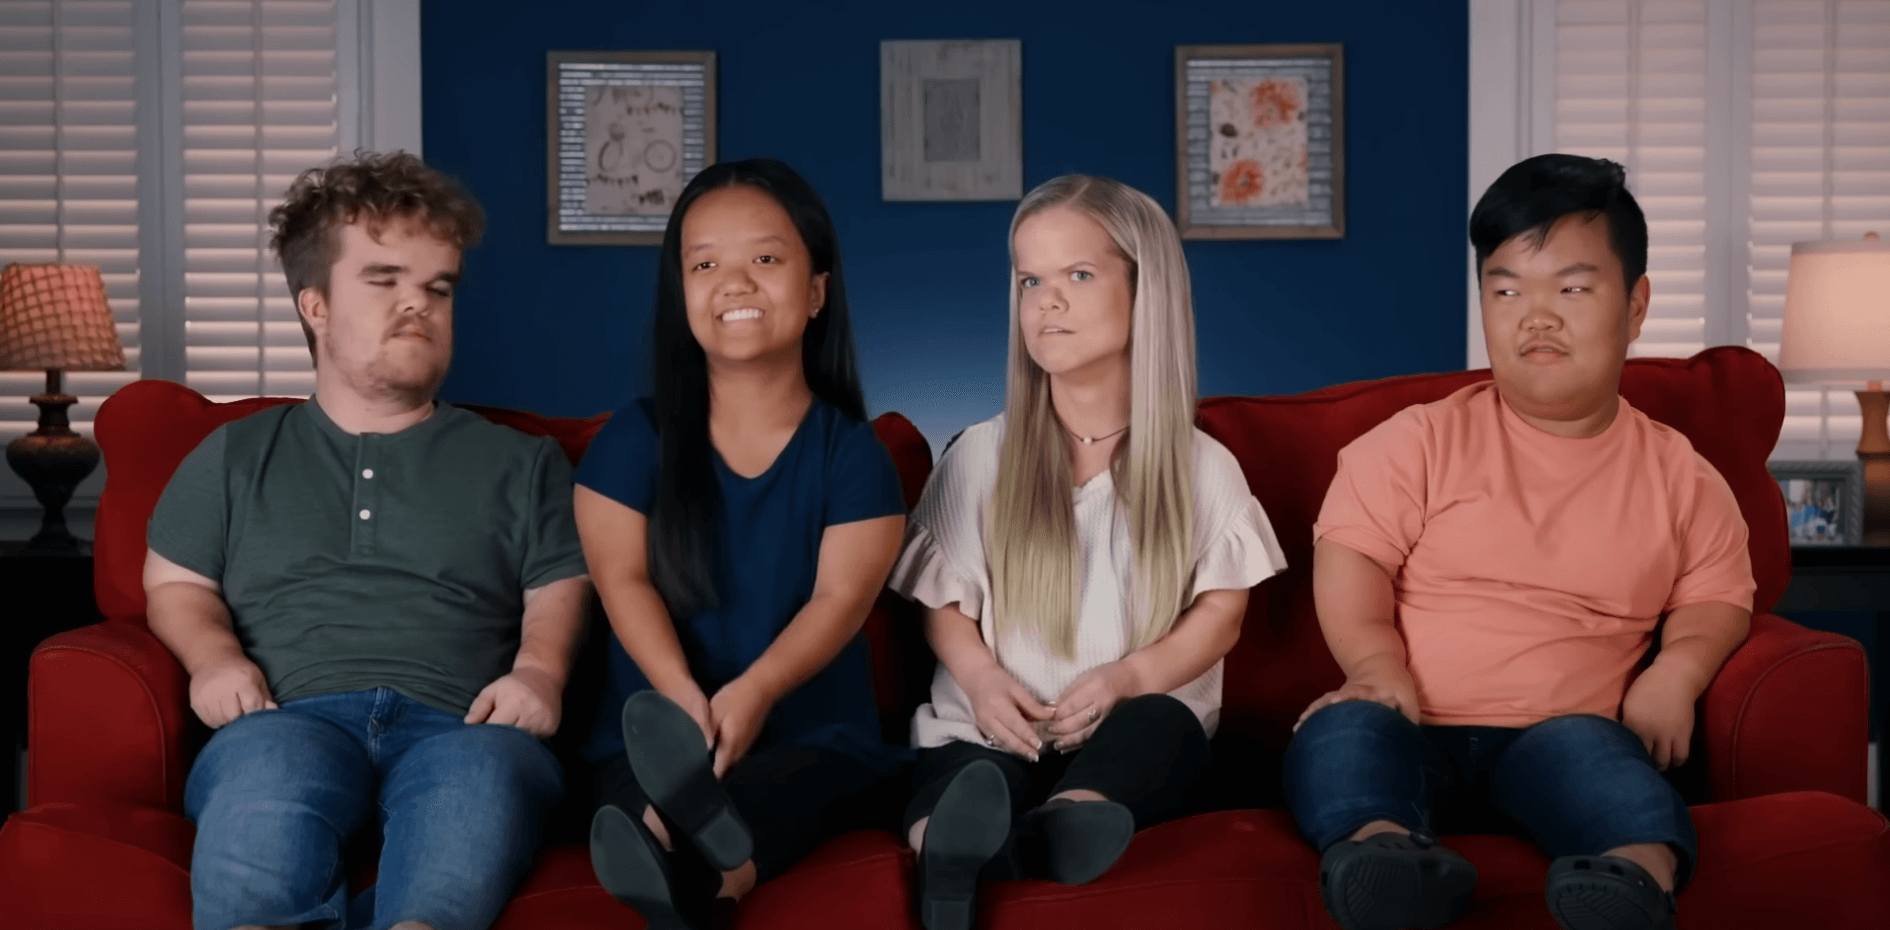 '7 Little Johnstons' cast members sitting on a couch and smiling